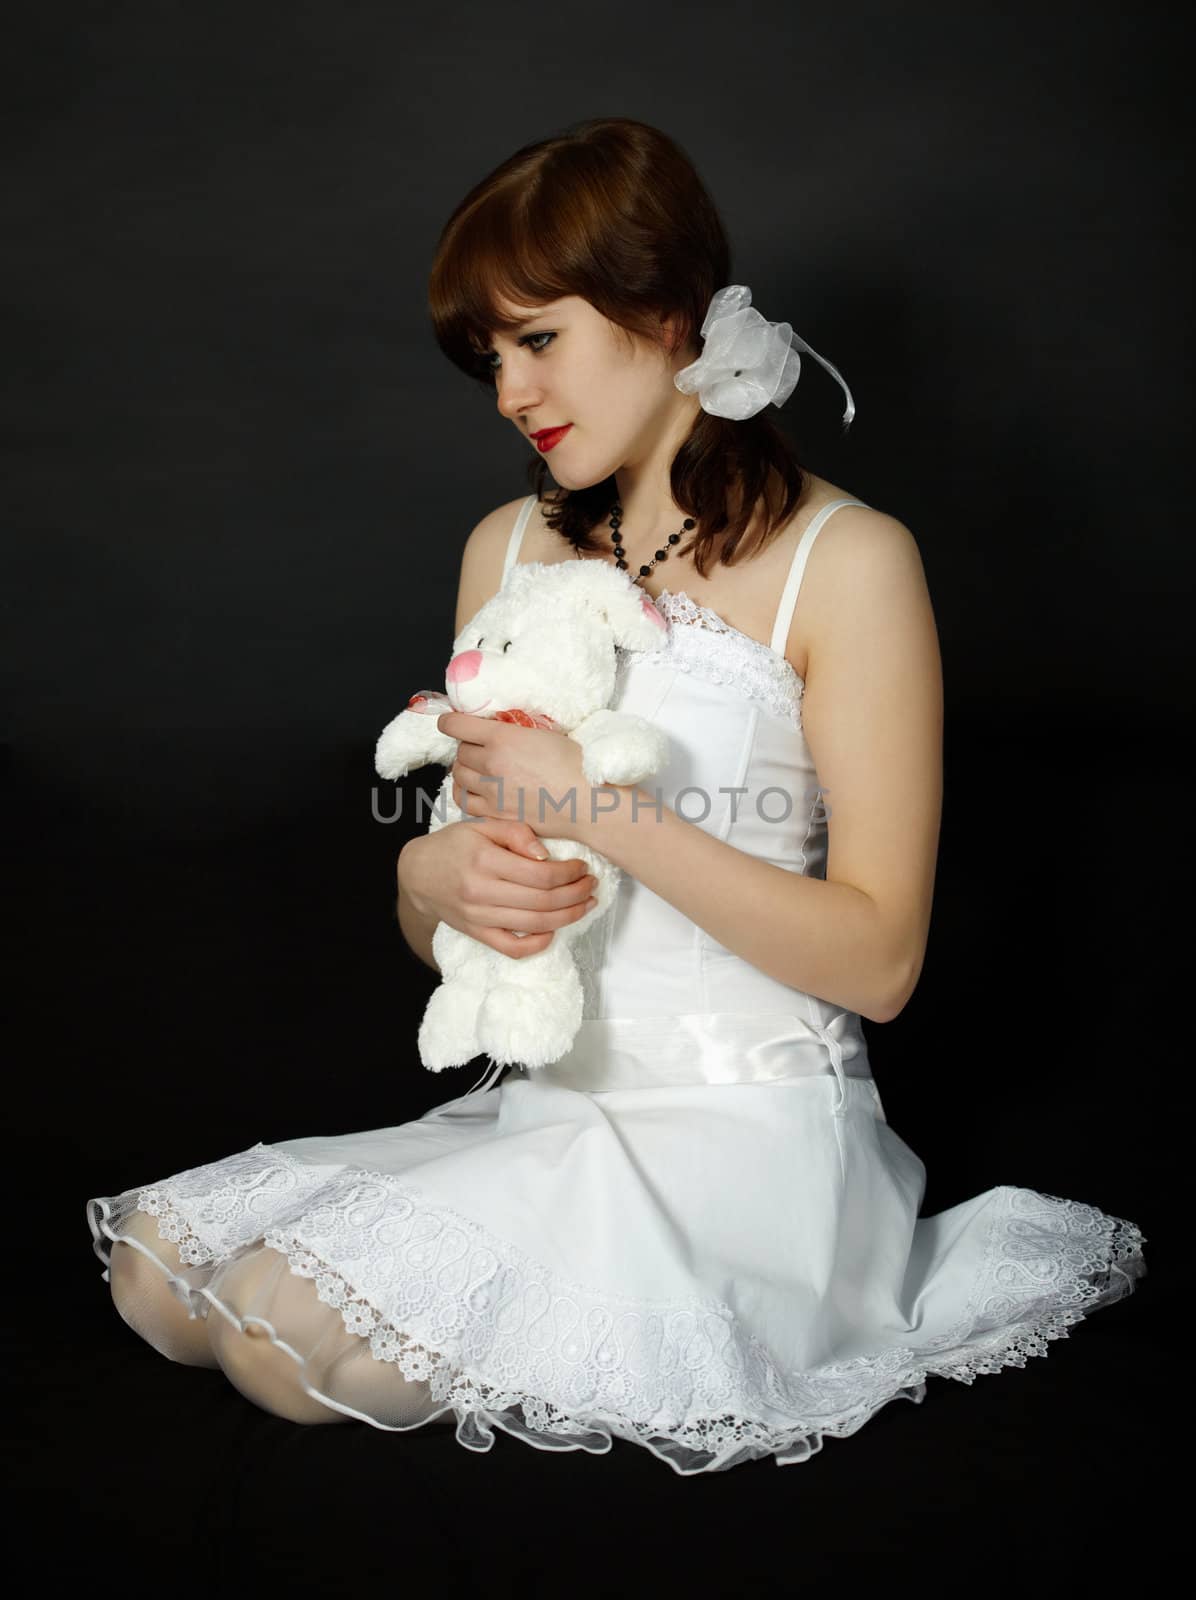 A beautiful young woman dressed in white on a black background